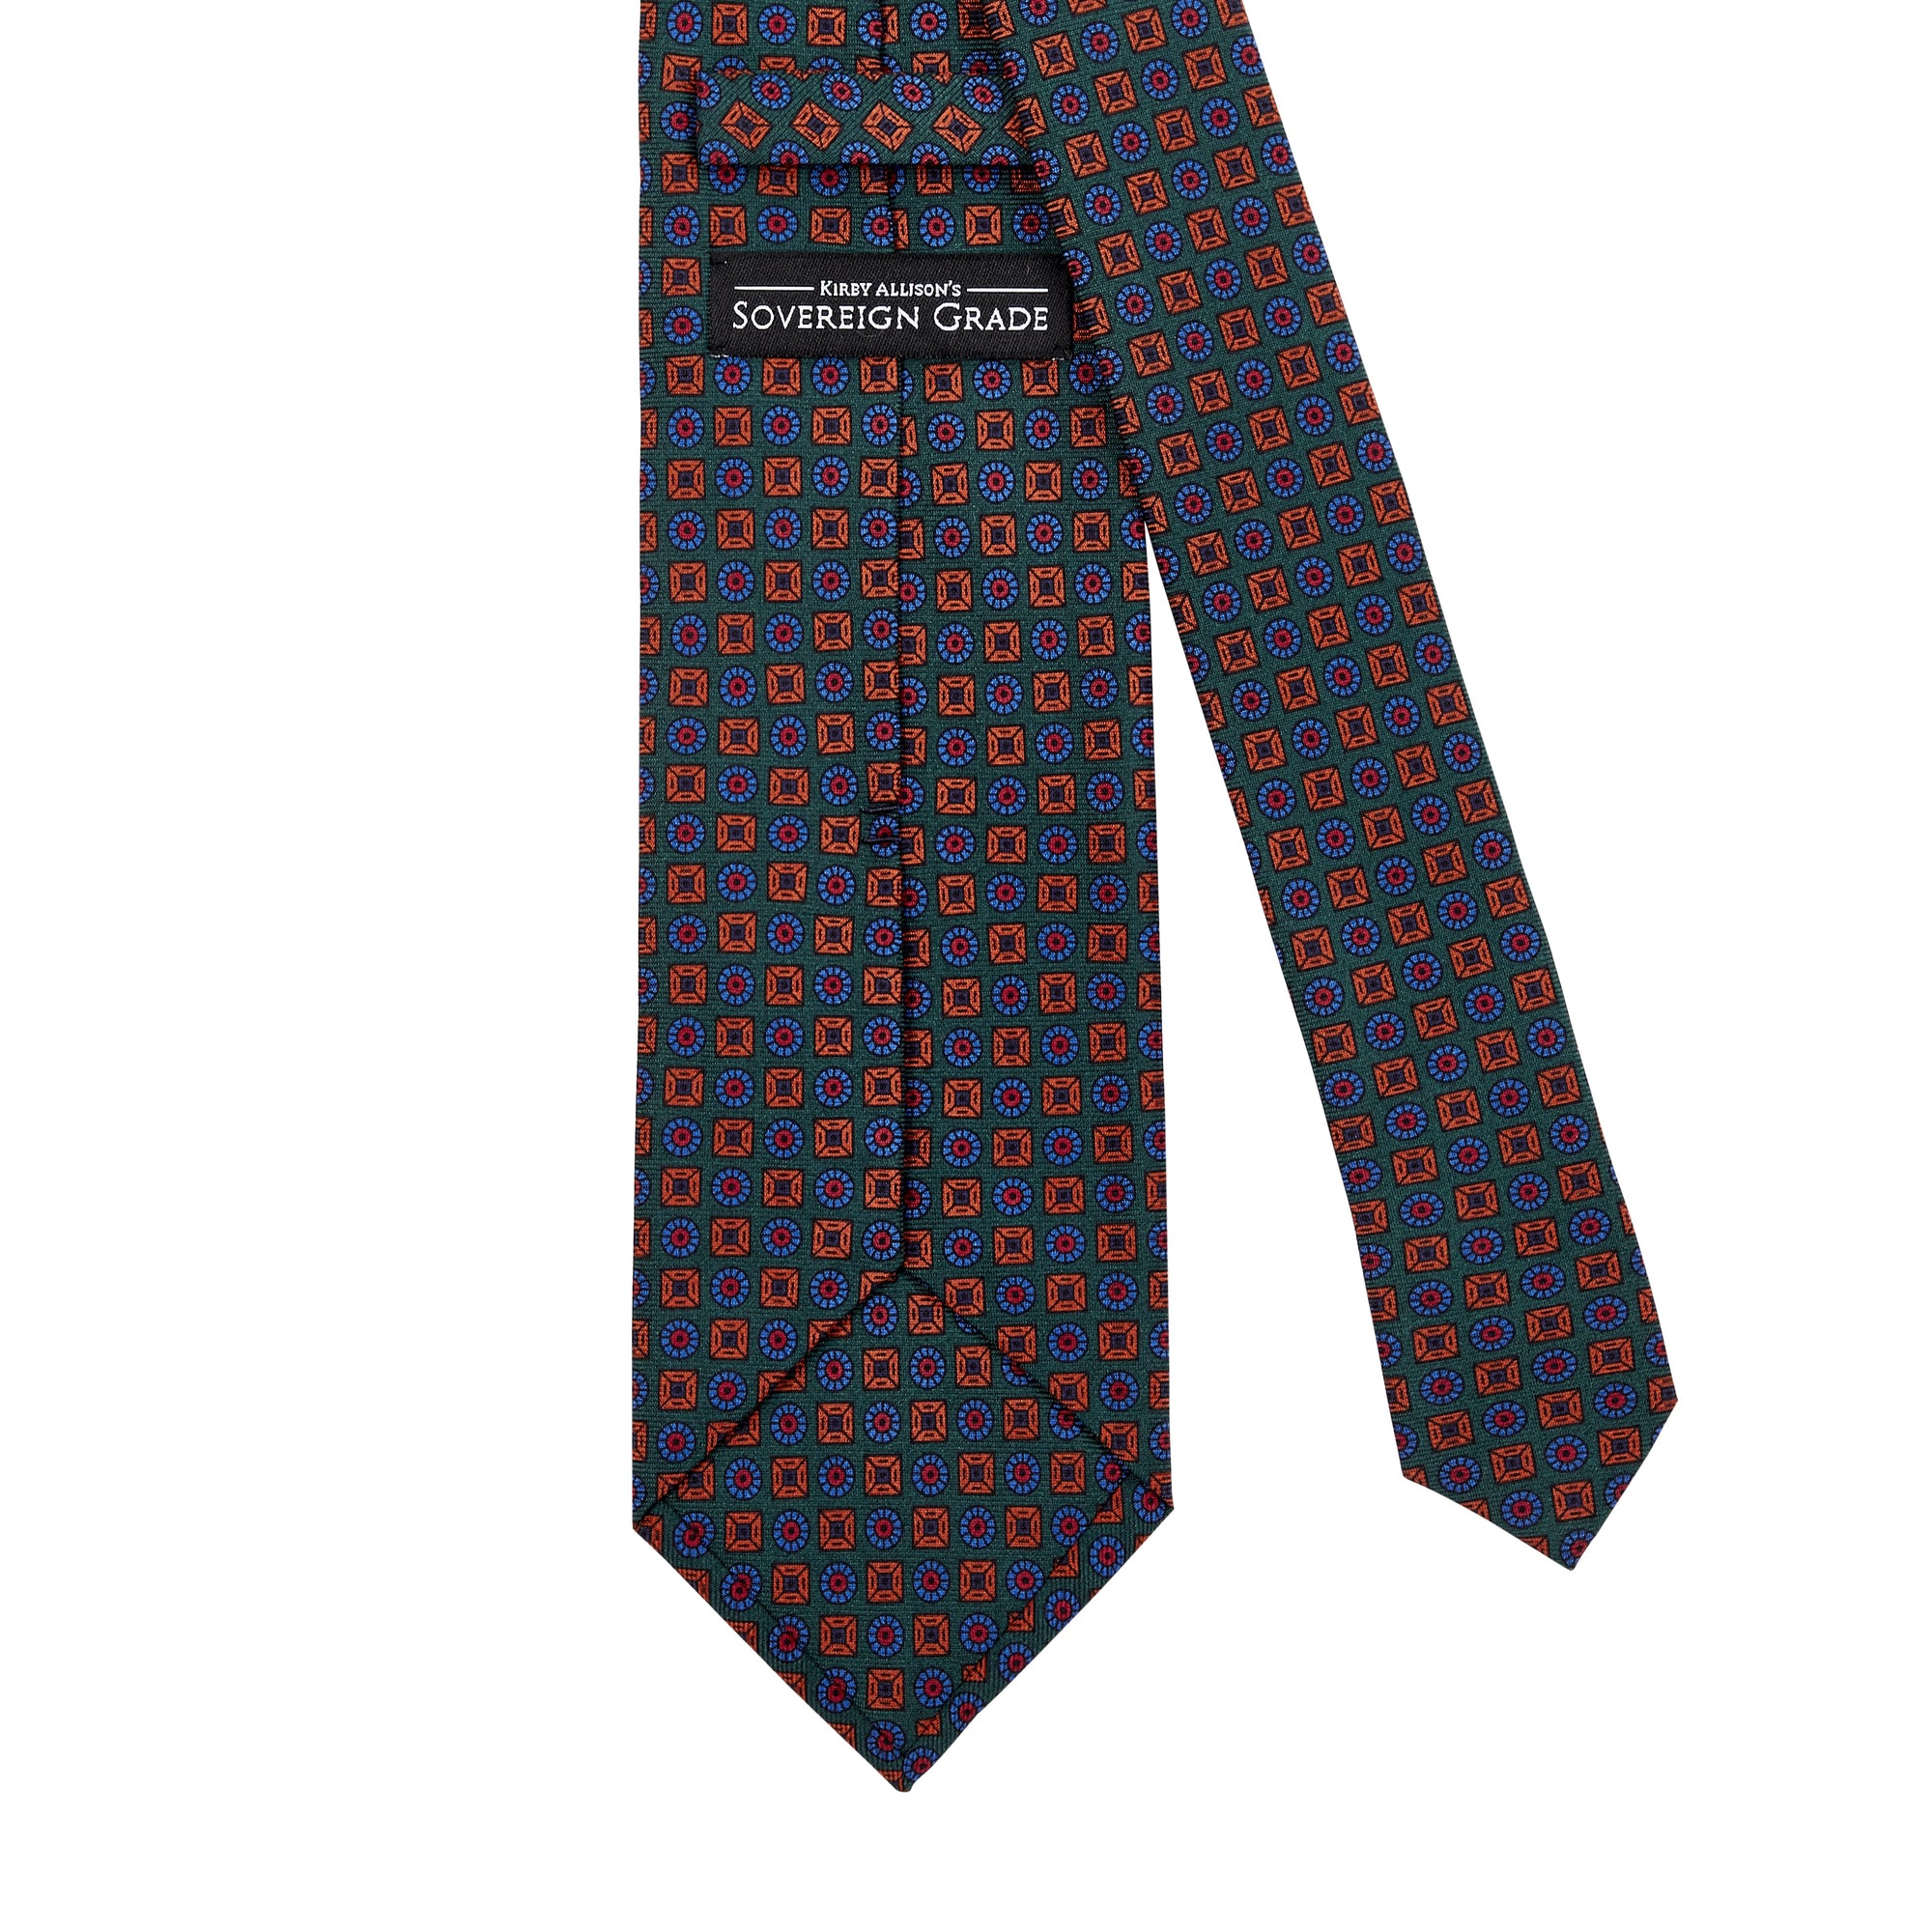 A Sovereign Grade Green Ancient Madder Tie from KirbyAllison.com with a United Kingdom-inspired orange and blue pattern.